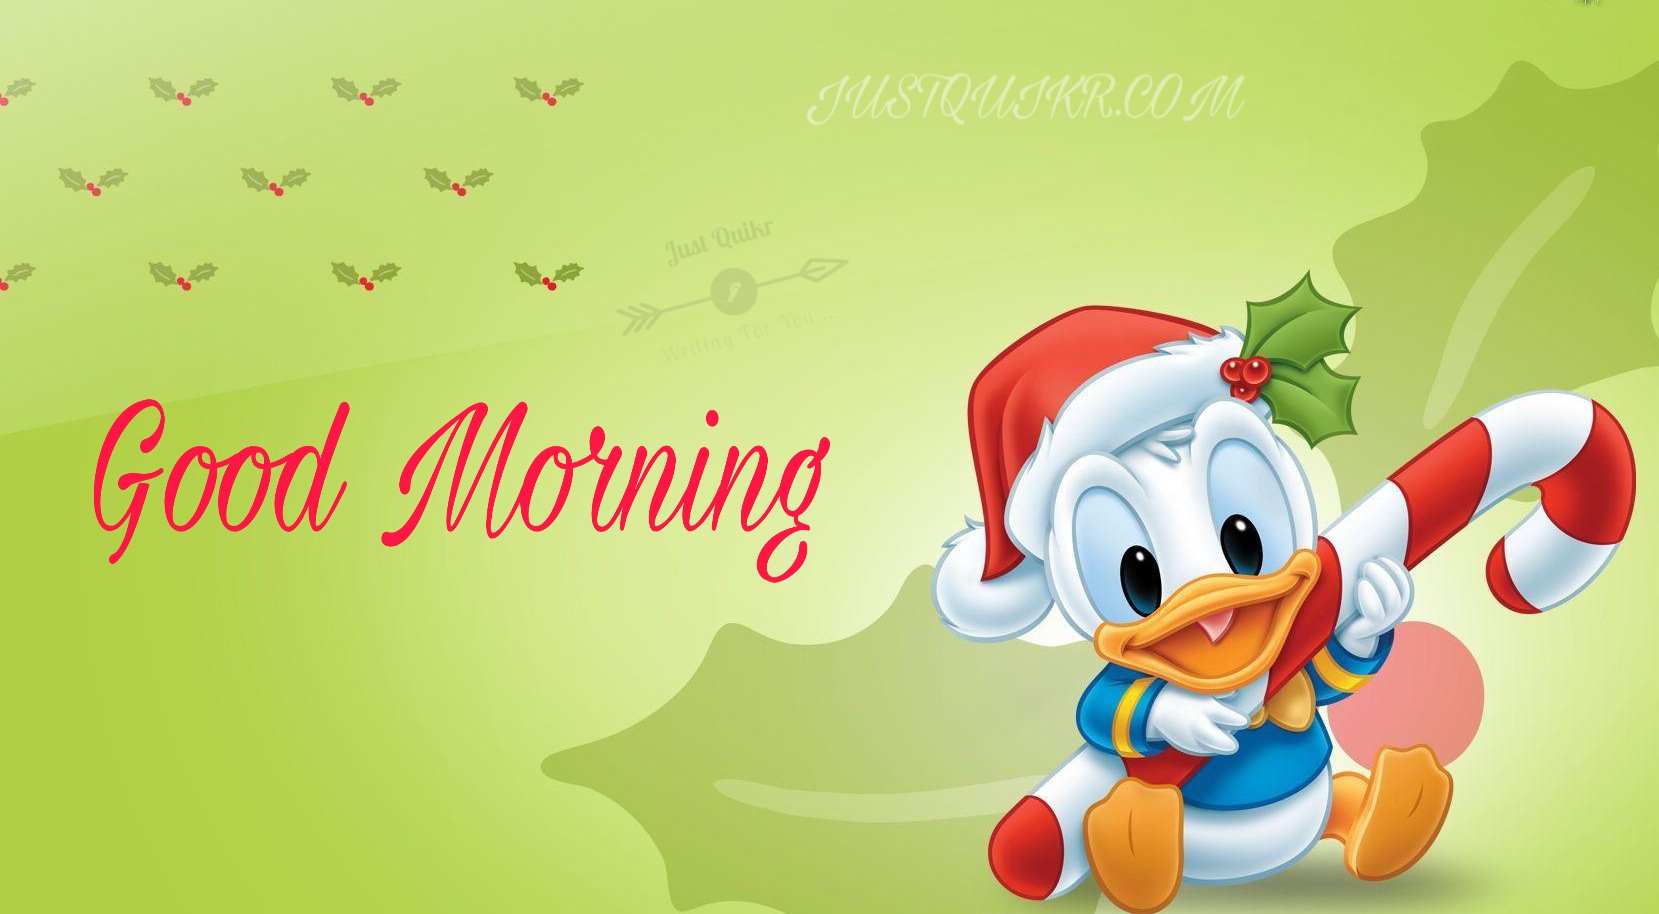 Top 8 : Good Morning Cartoon Pics Images | Just Quikr presents birthday  wishes, festivals, education